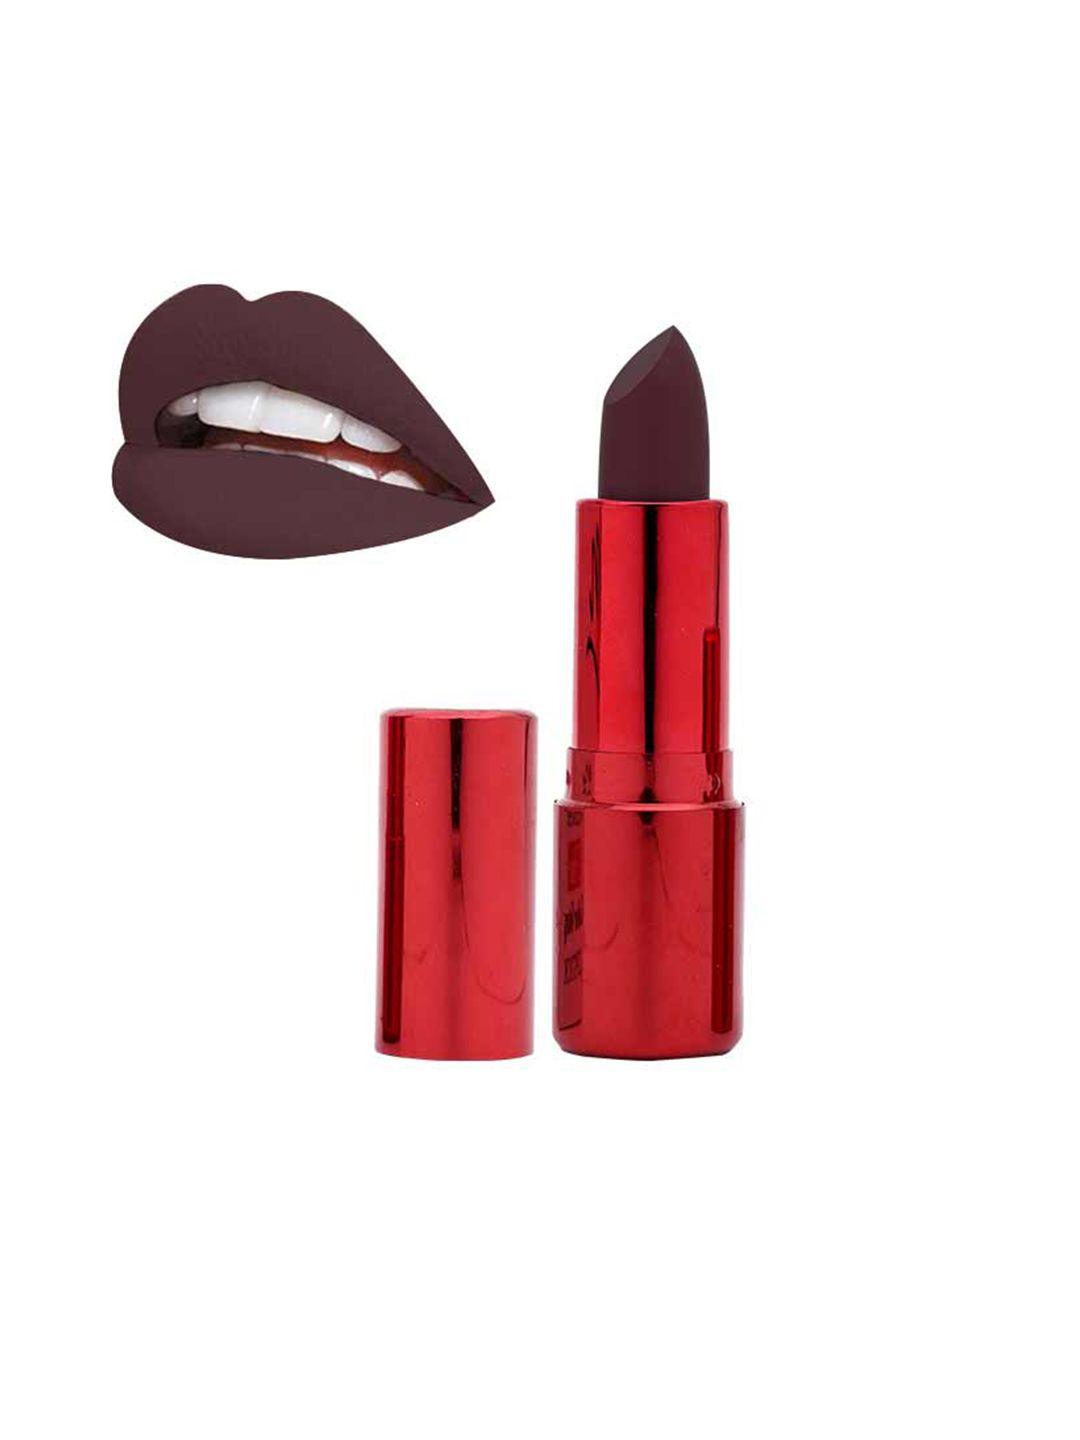 beautyrelay london 12 hour color stay lipstick with vitamin c 3.5g - rich berry